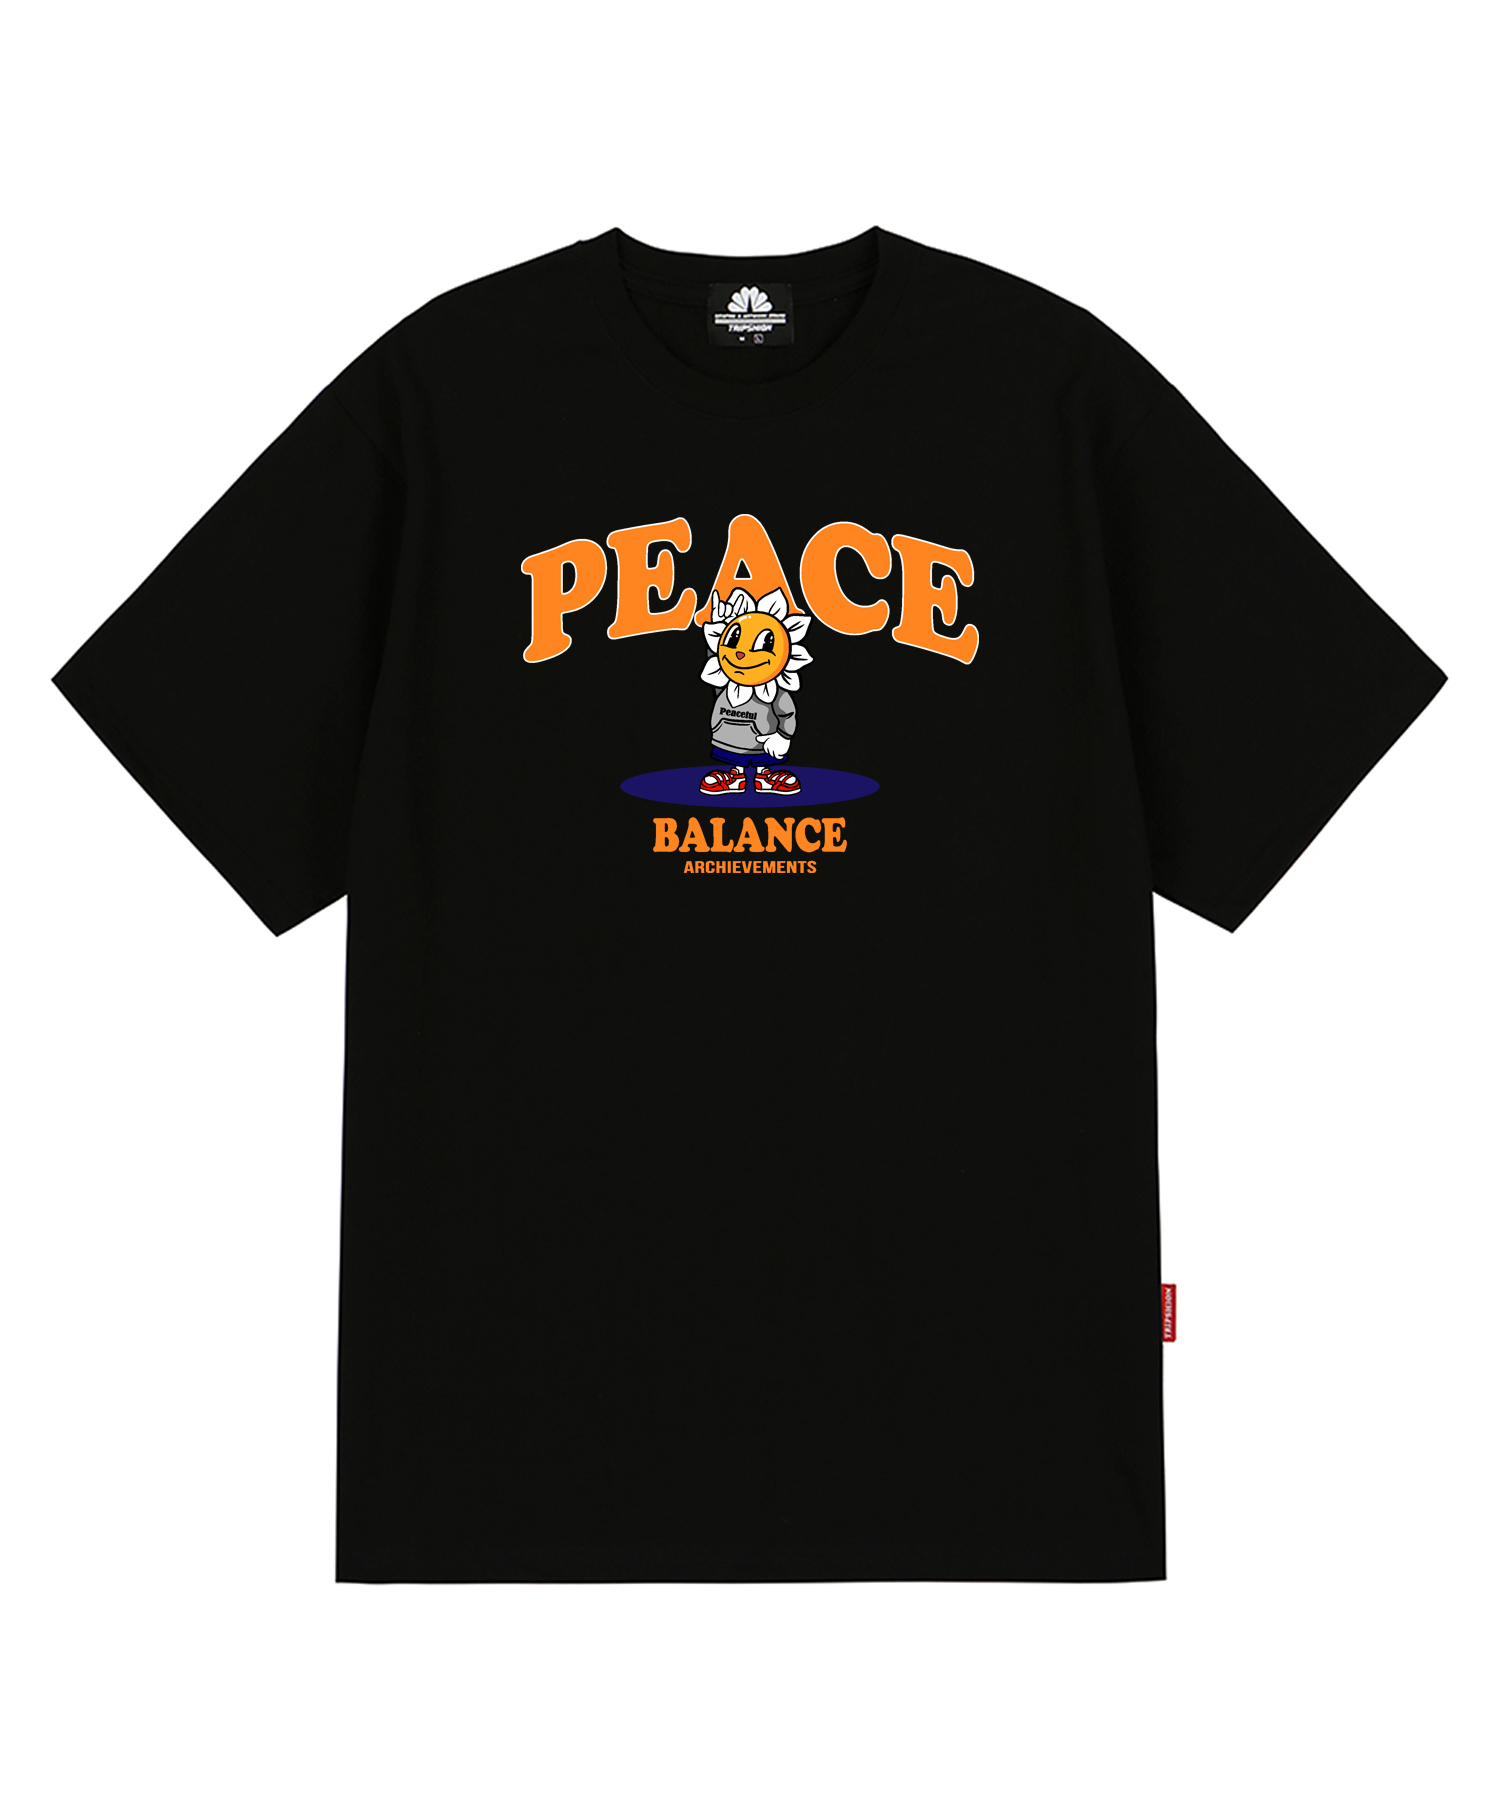 PEACE TIGER GRAPHIC T-SHIRTS - BLACK